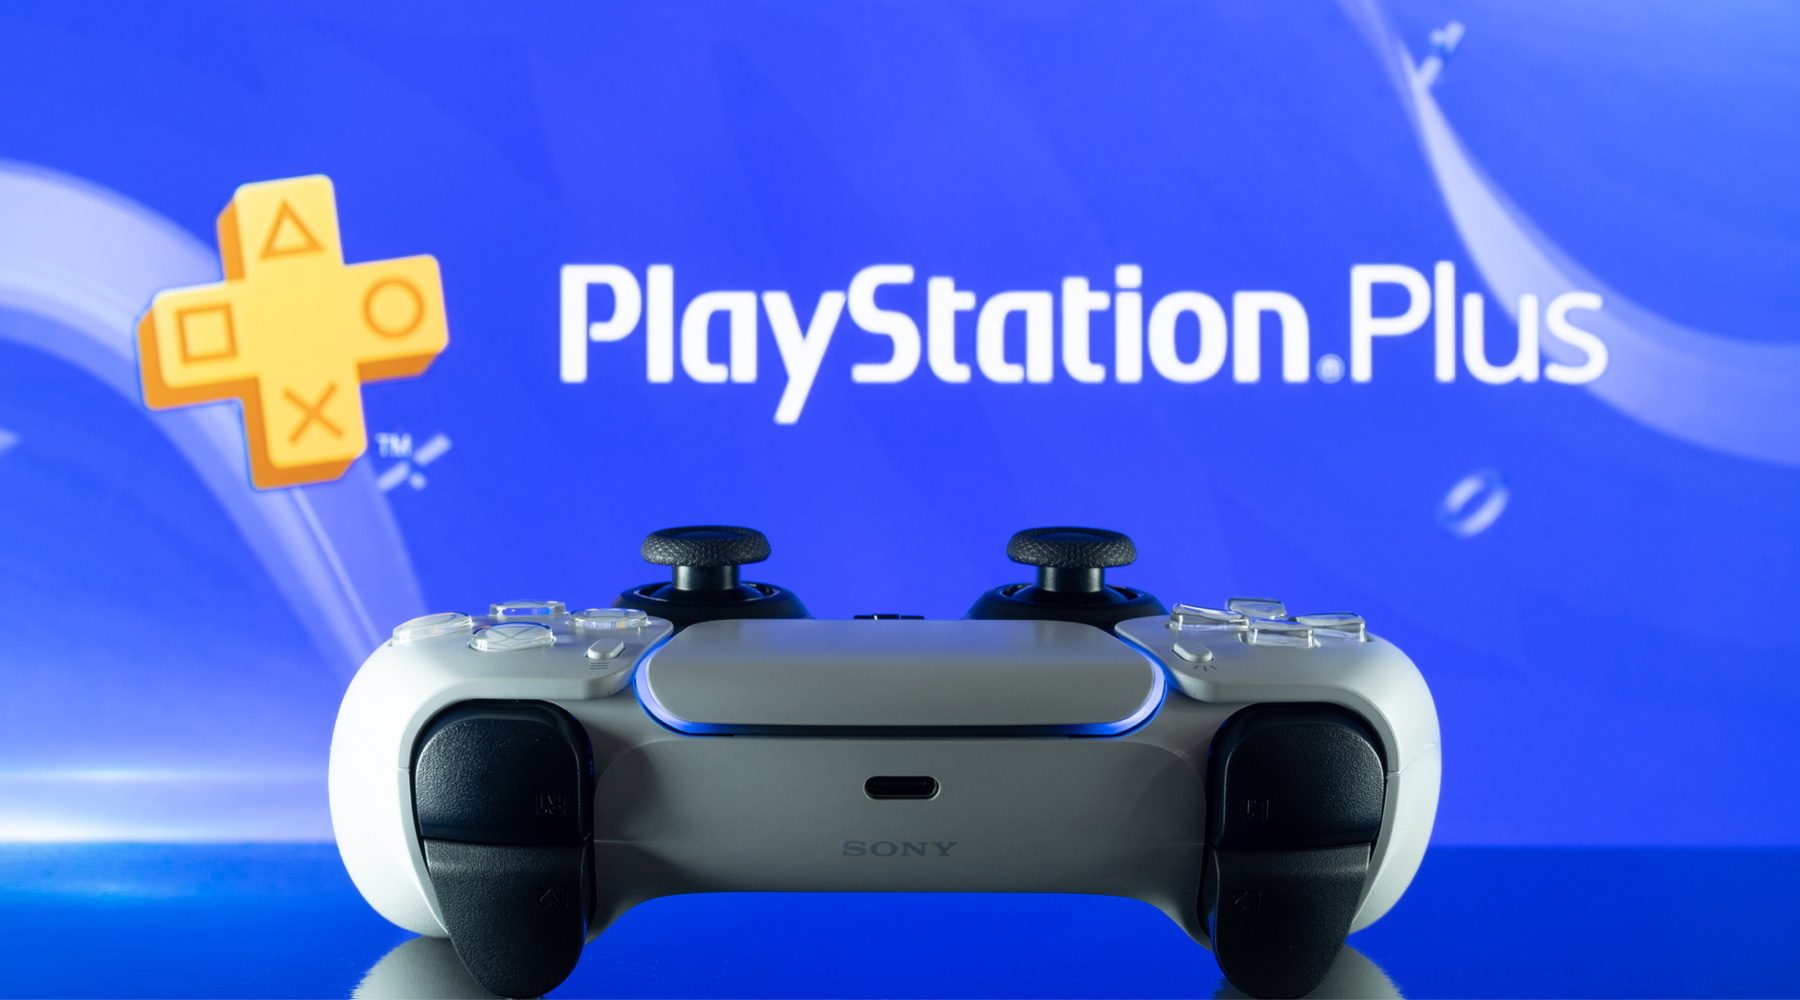 PlayStation Plus has lost nearly 2 million subscribers since relaunch -  Checkpoint